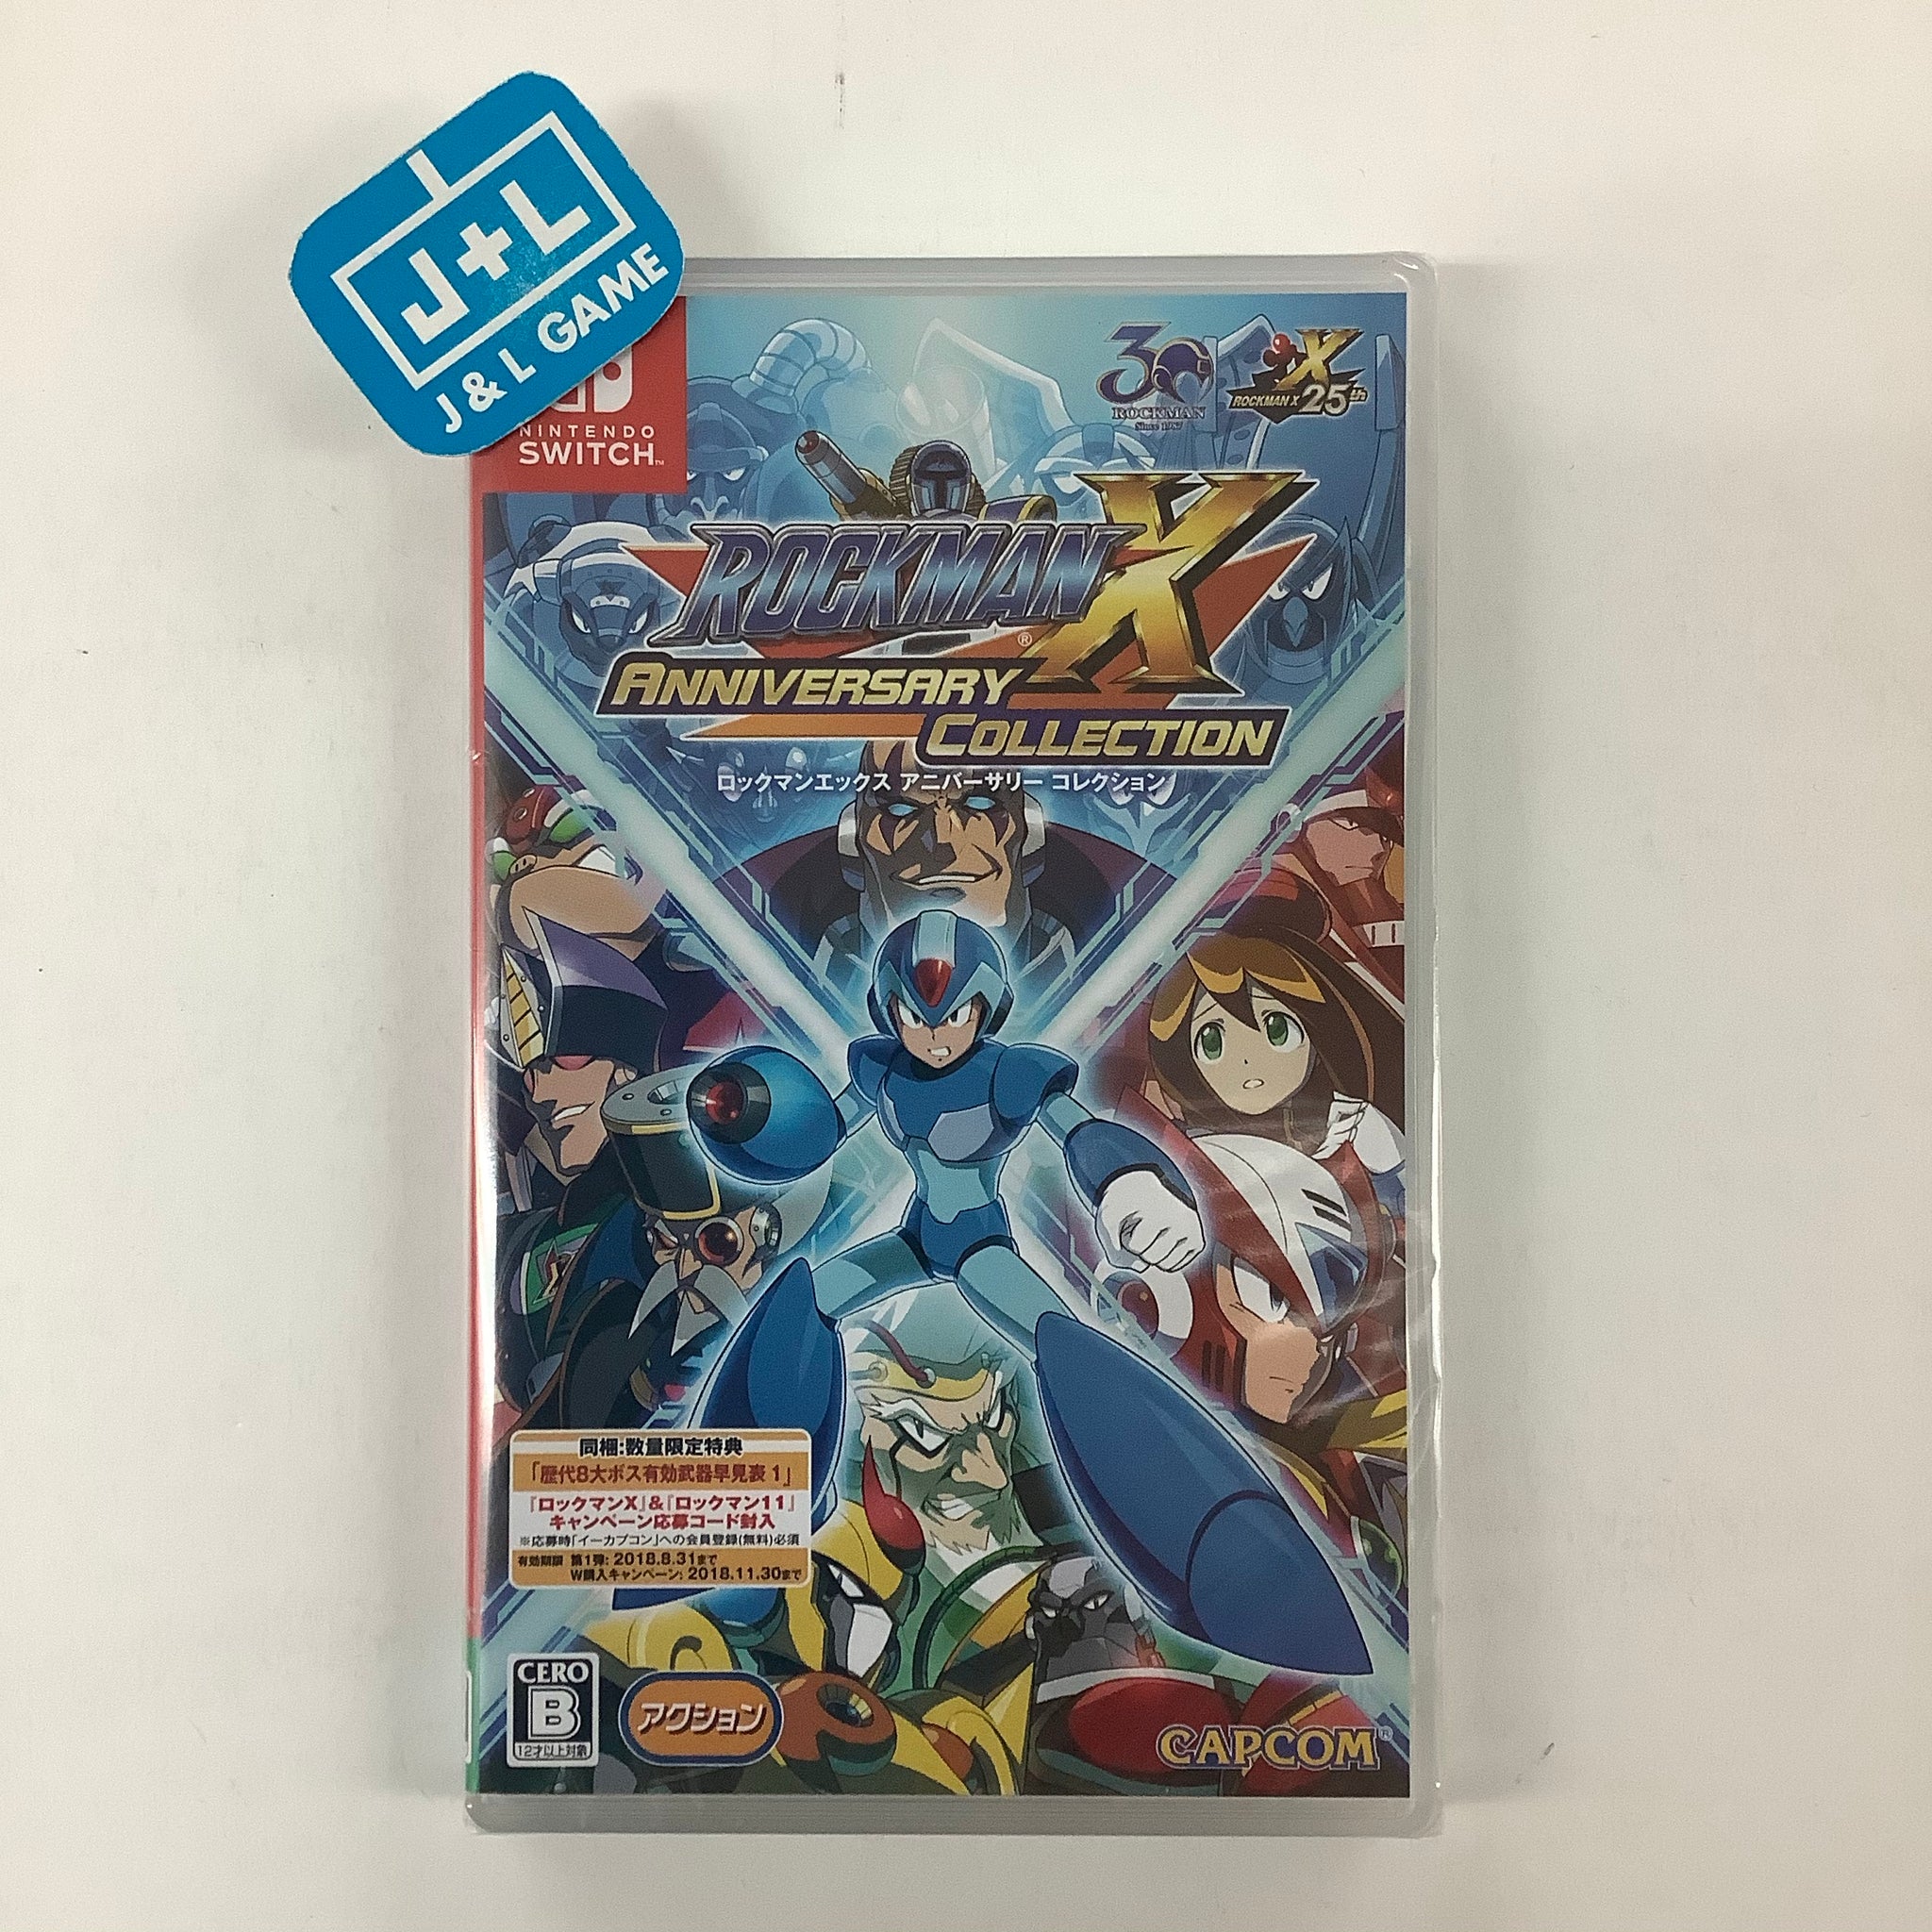 Mega Man X Legacy Collection - (NSW) Nintendo Switch (Japanese Import) Video Games Capcom   